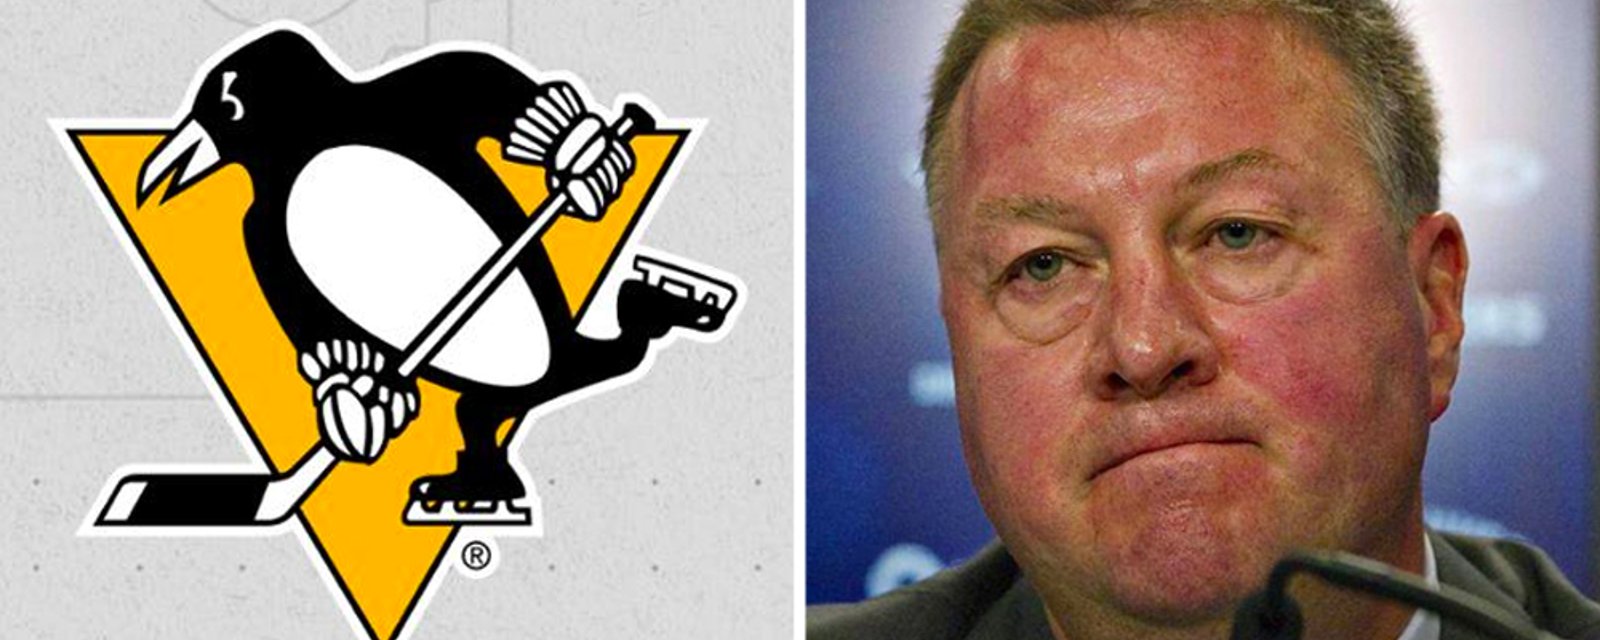 Former Canucks GM Mike Gillis applies for Penguins job, has his entire proposal and resume leaked online